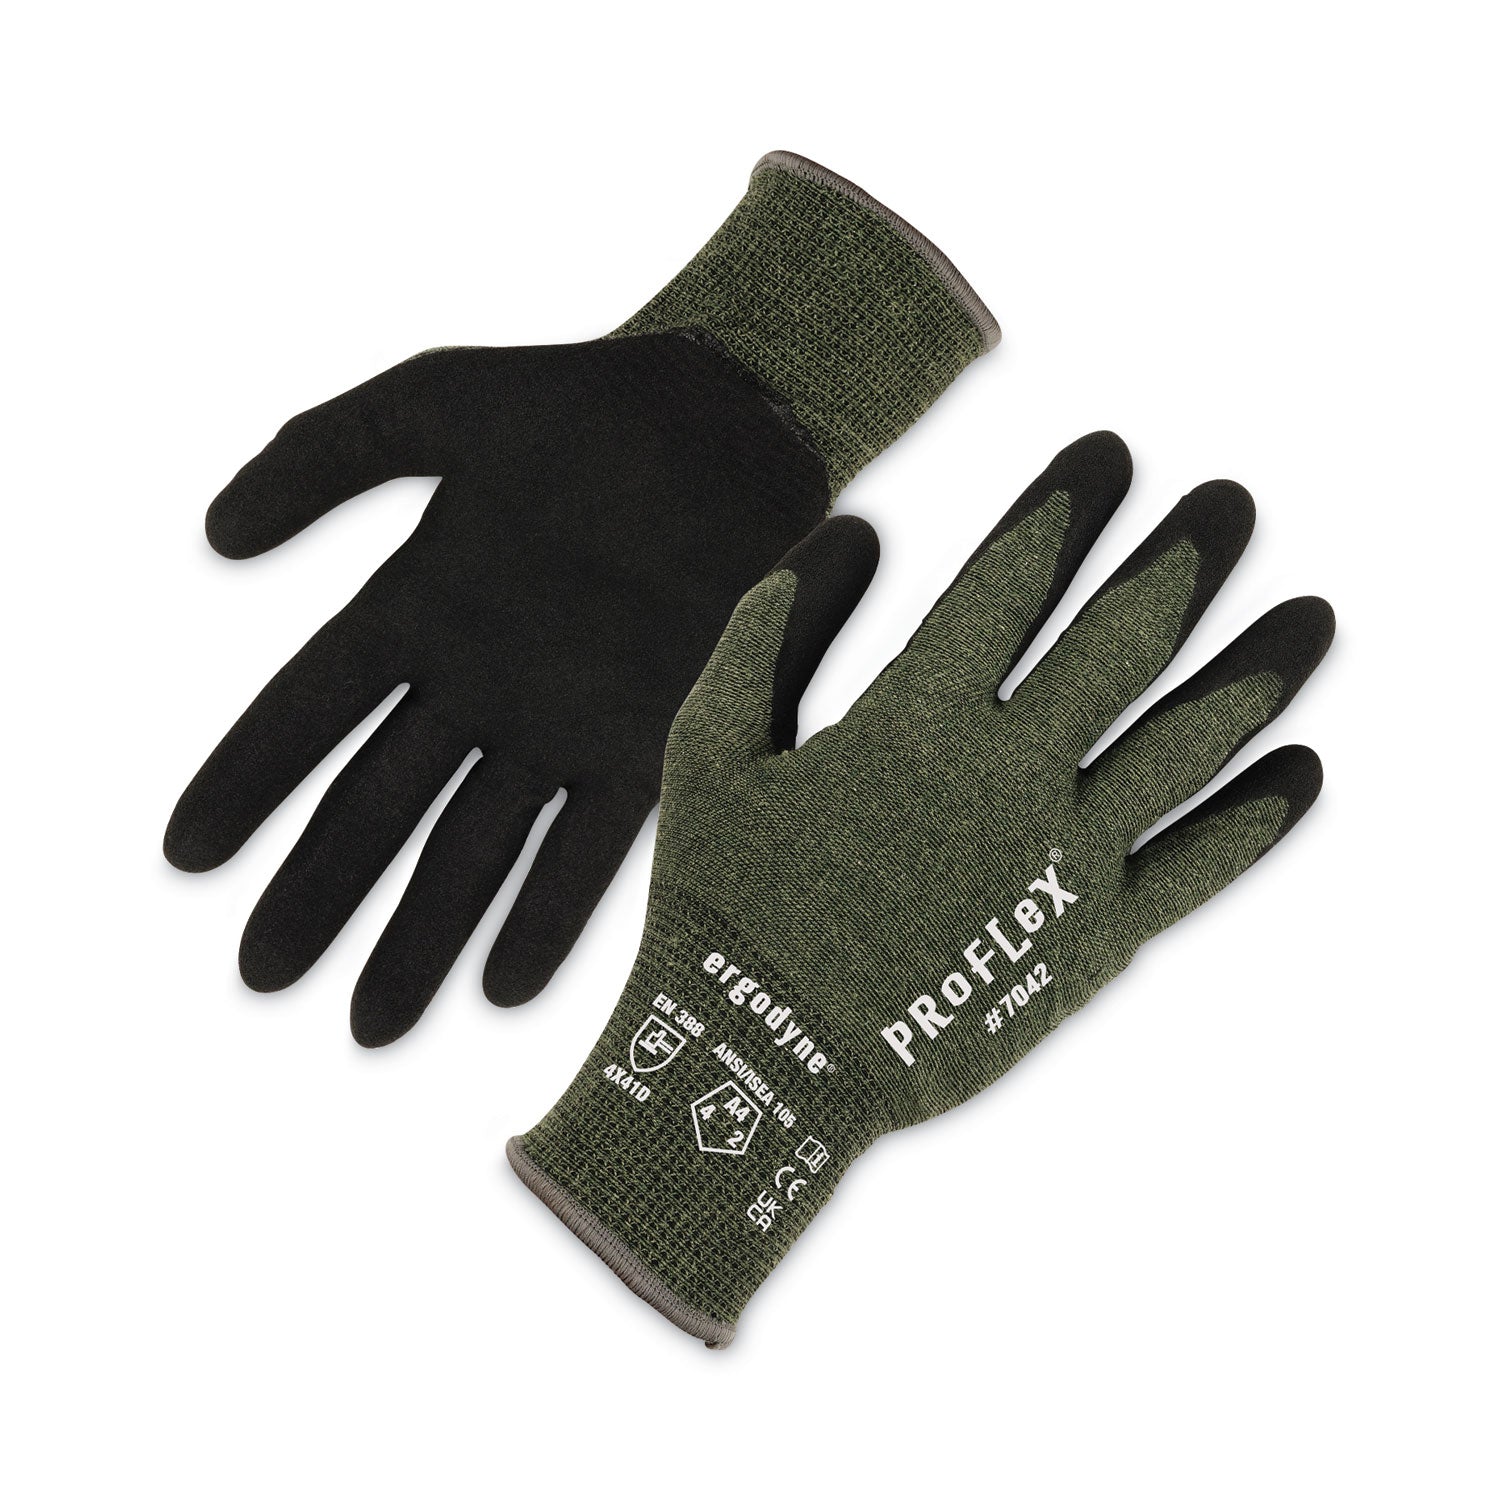 proflex-7042-ansi-a4-nitrile-coated-cr-gloves-green-2x-large-pair-ships-in-1-3-business-days_ego10346 - 7